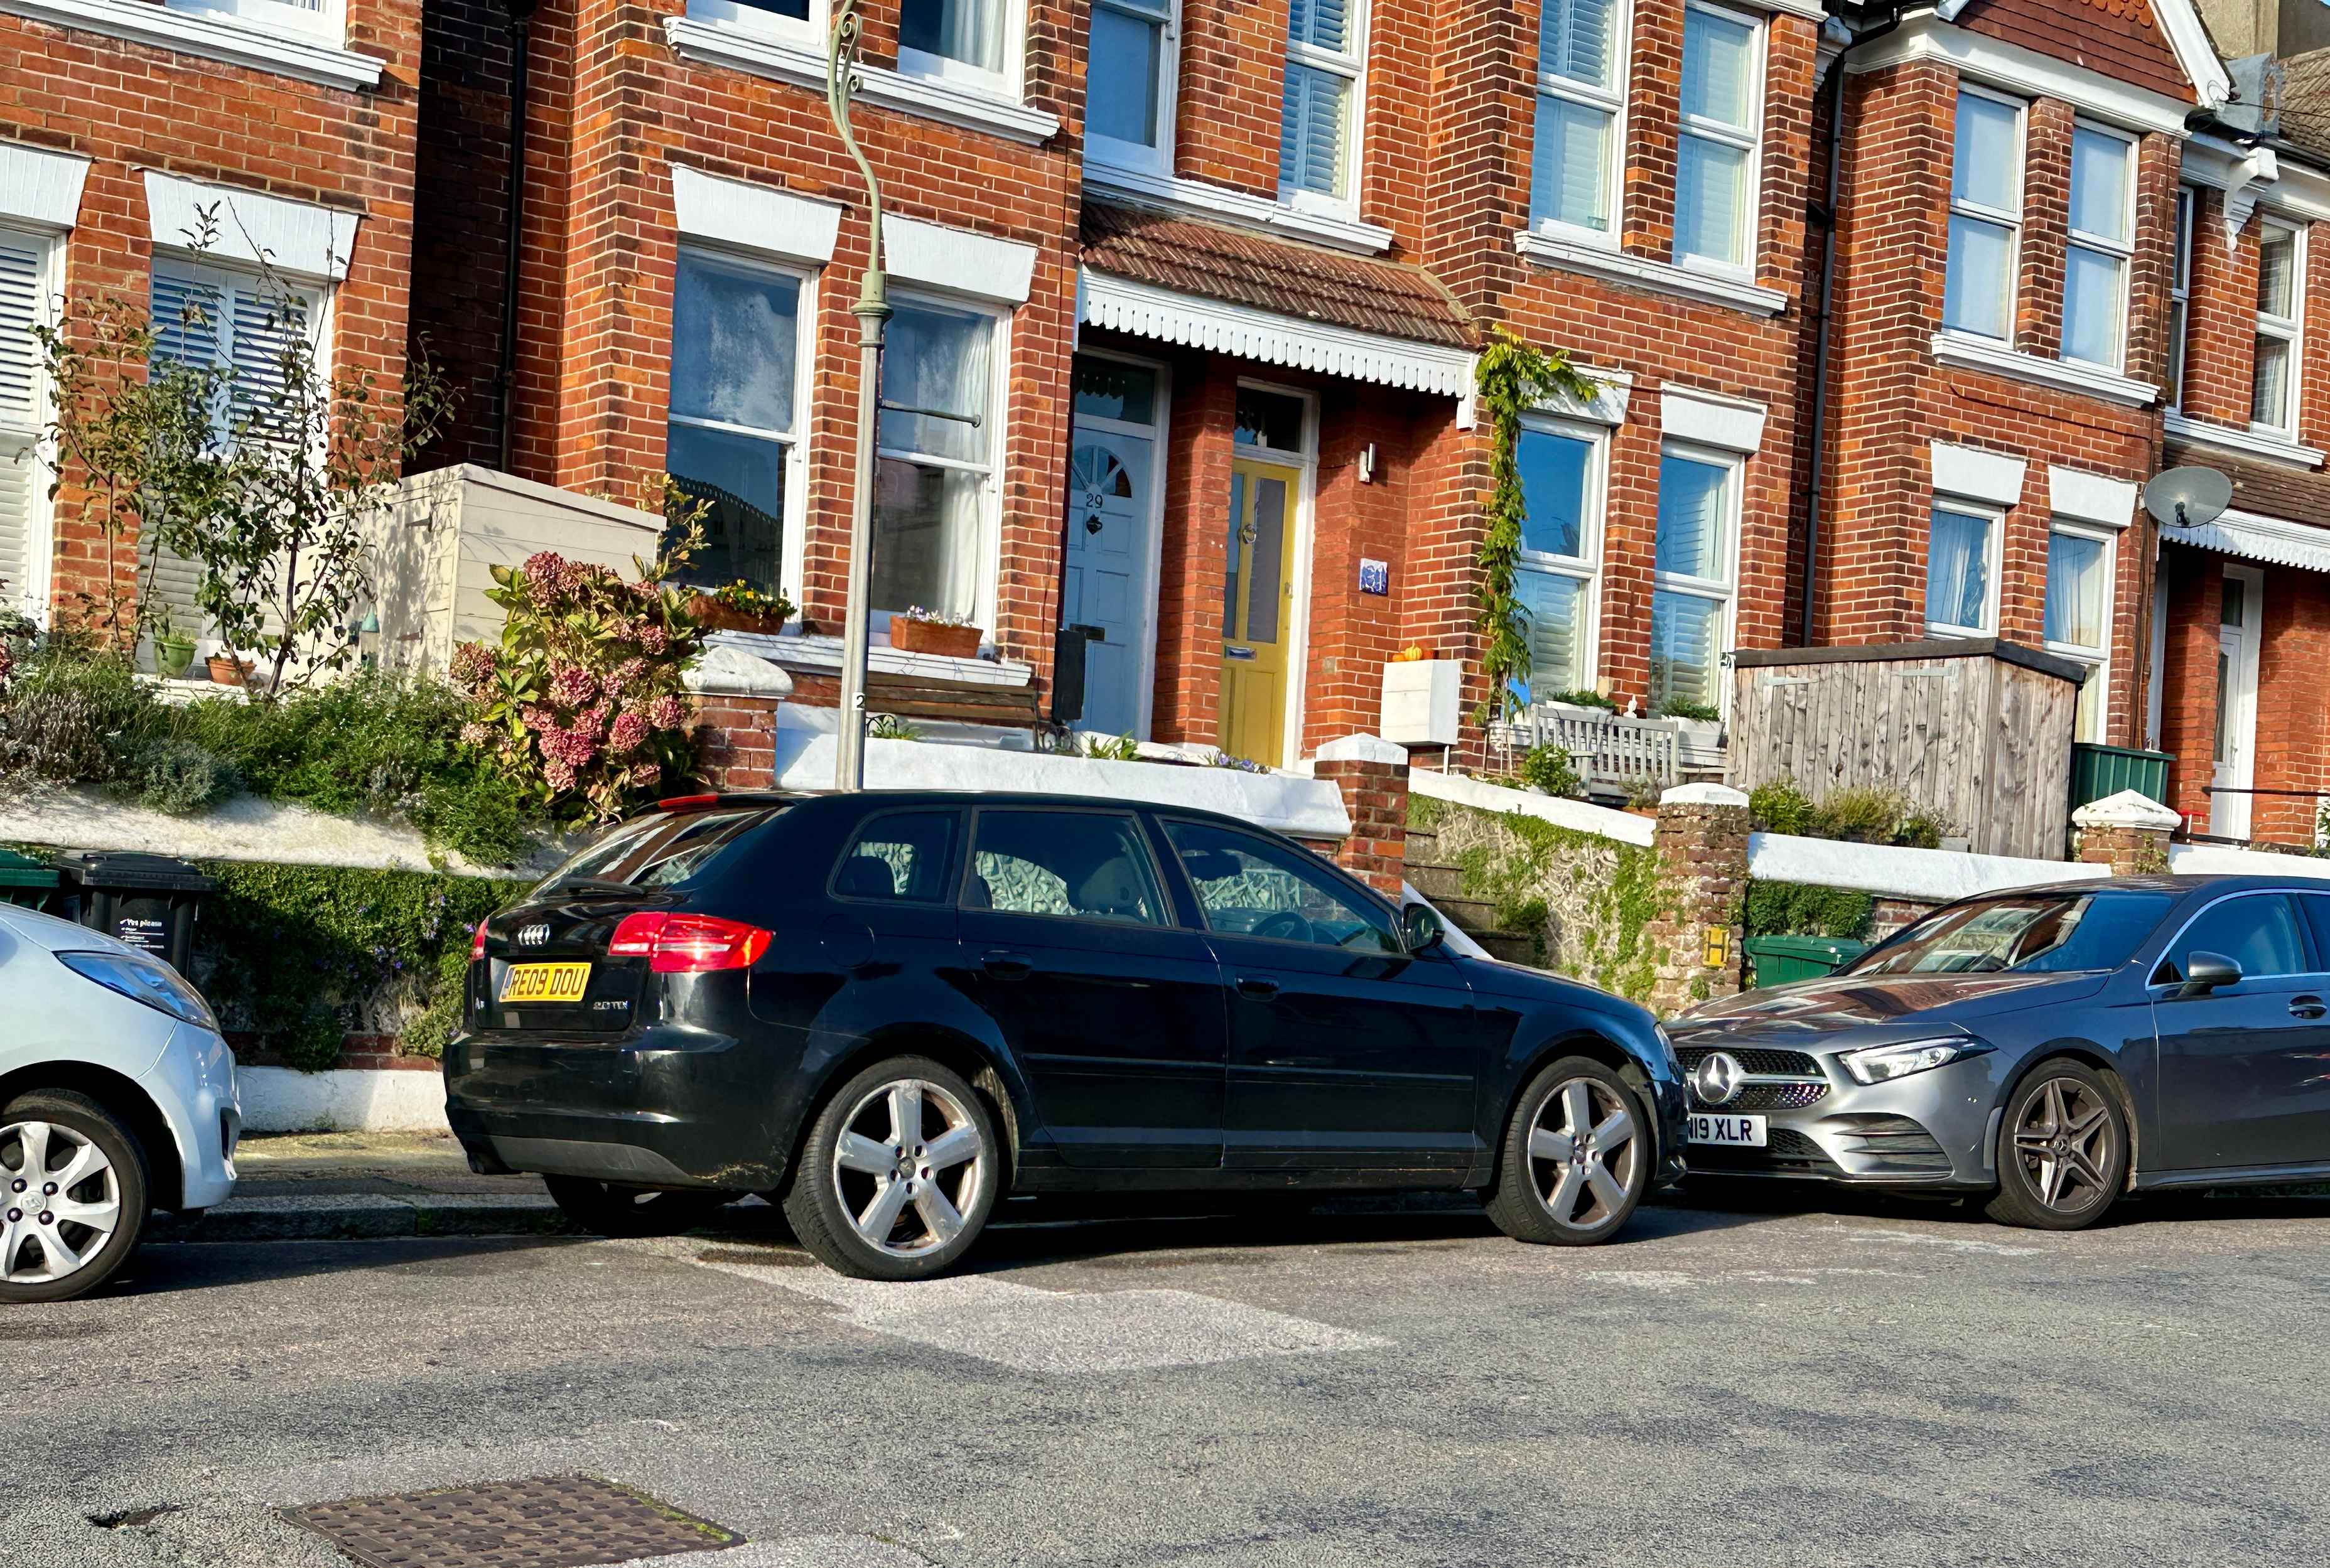 Photograph of RE09 DOU - a Black Audi A3 parked in Hollingdean by a non-resident who uses the local area as part of their Brighton commute. The fifth of six photographs supplied by the residents of Hollingdean.